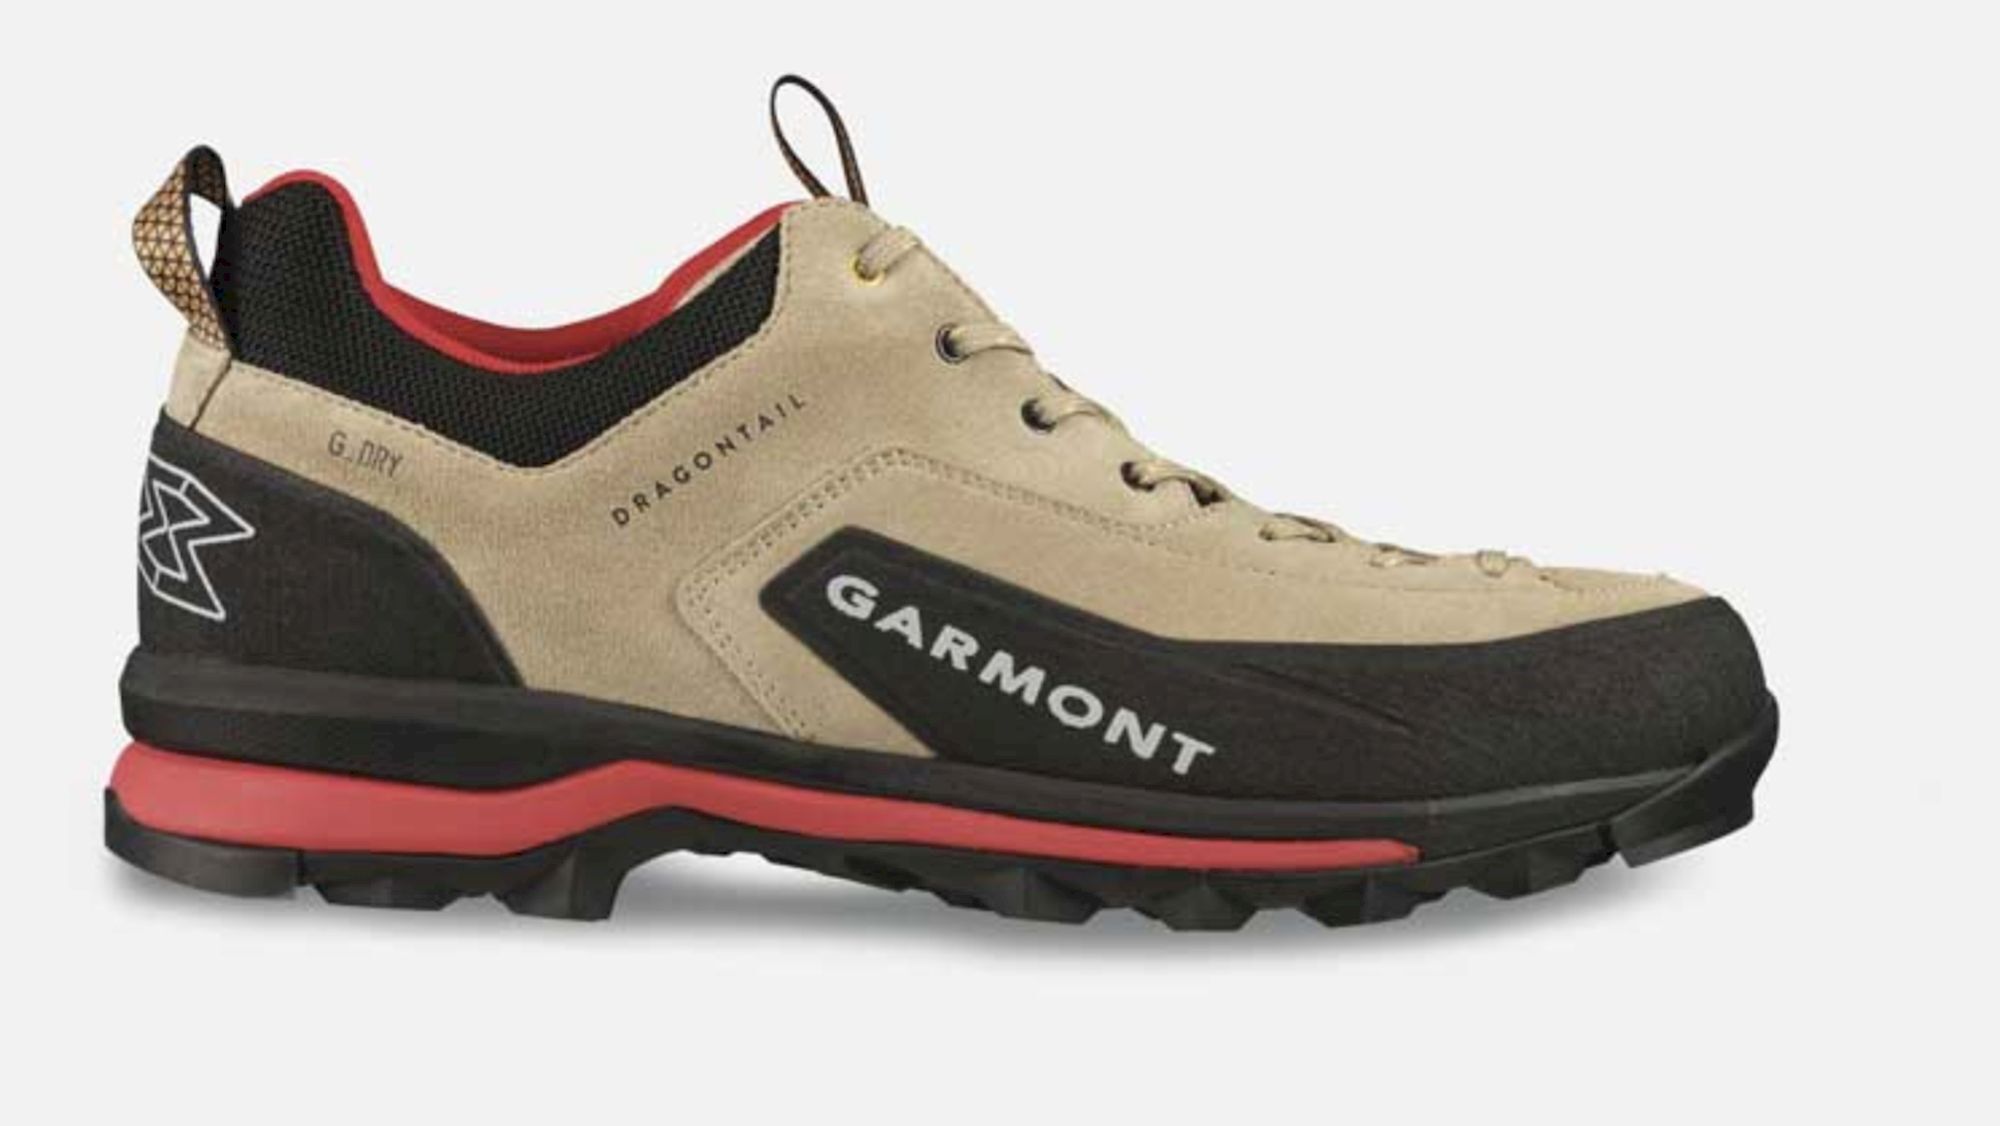 Garmont Dragontail G-Dry - Chaussures randonnée homme | Hardloop